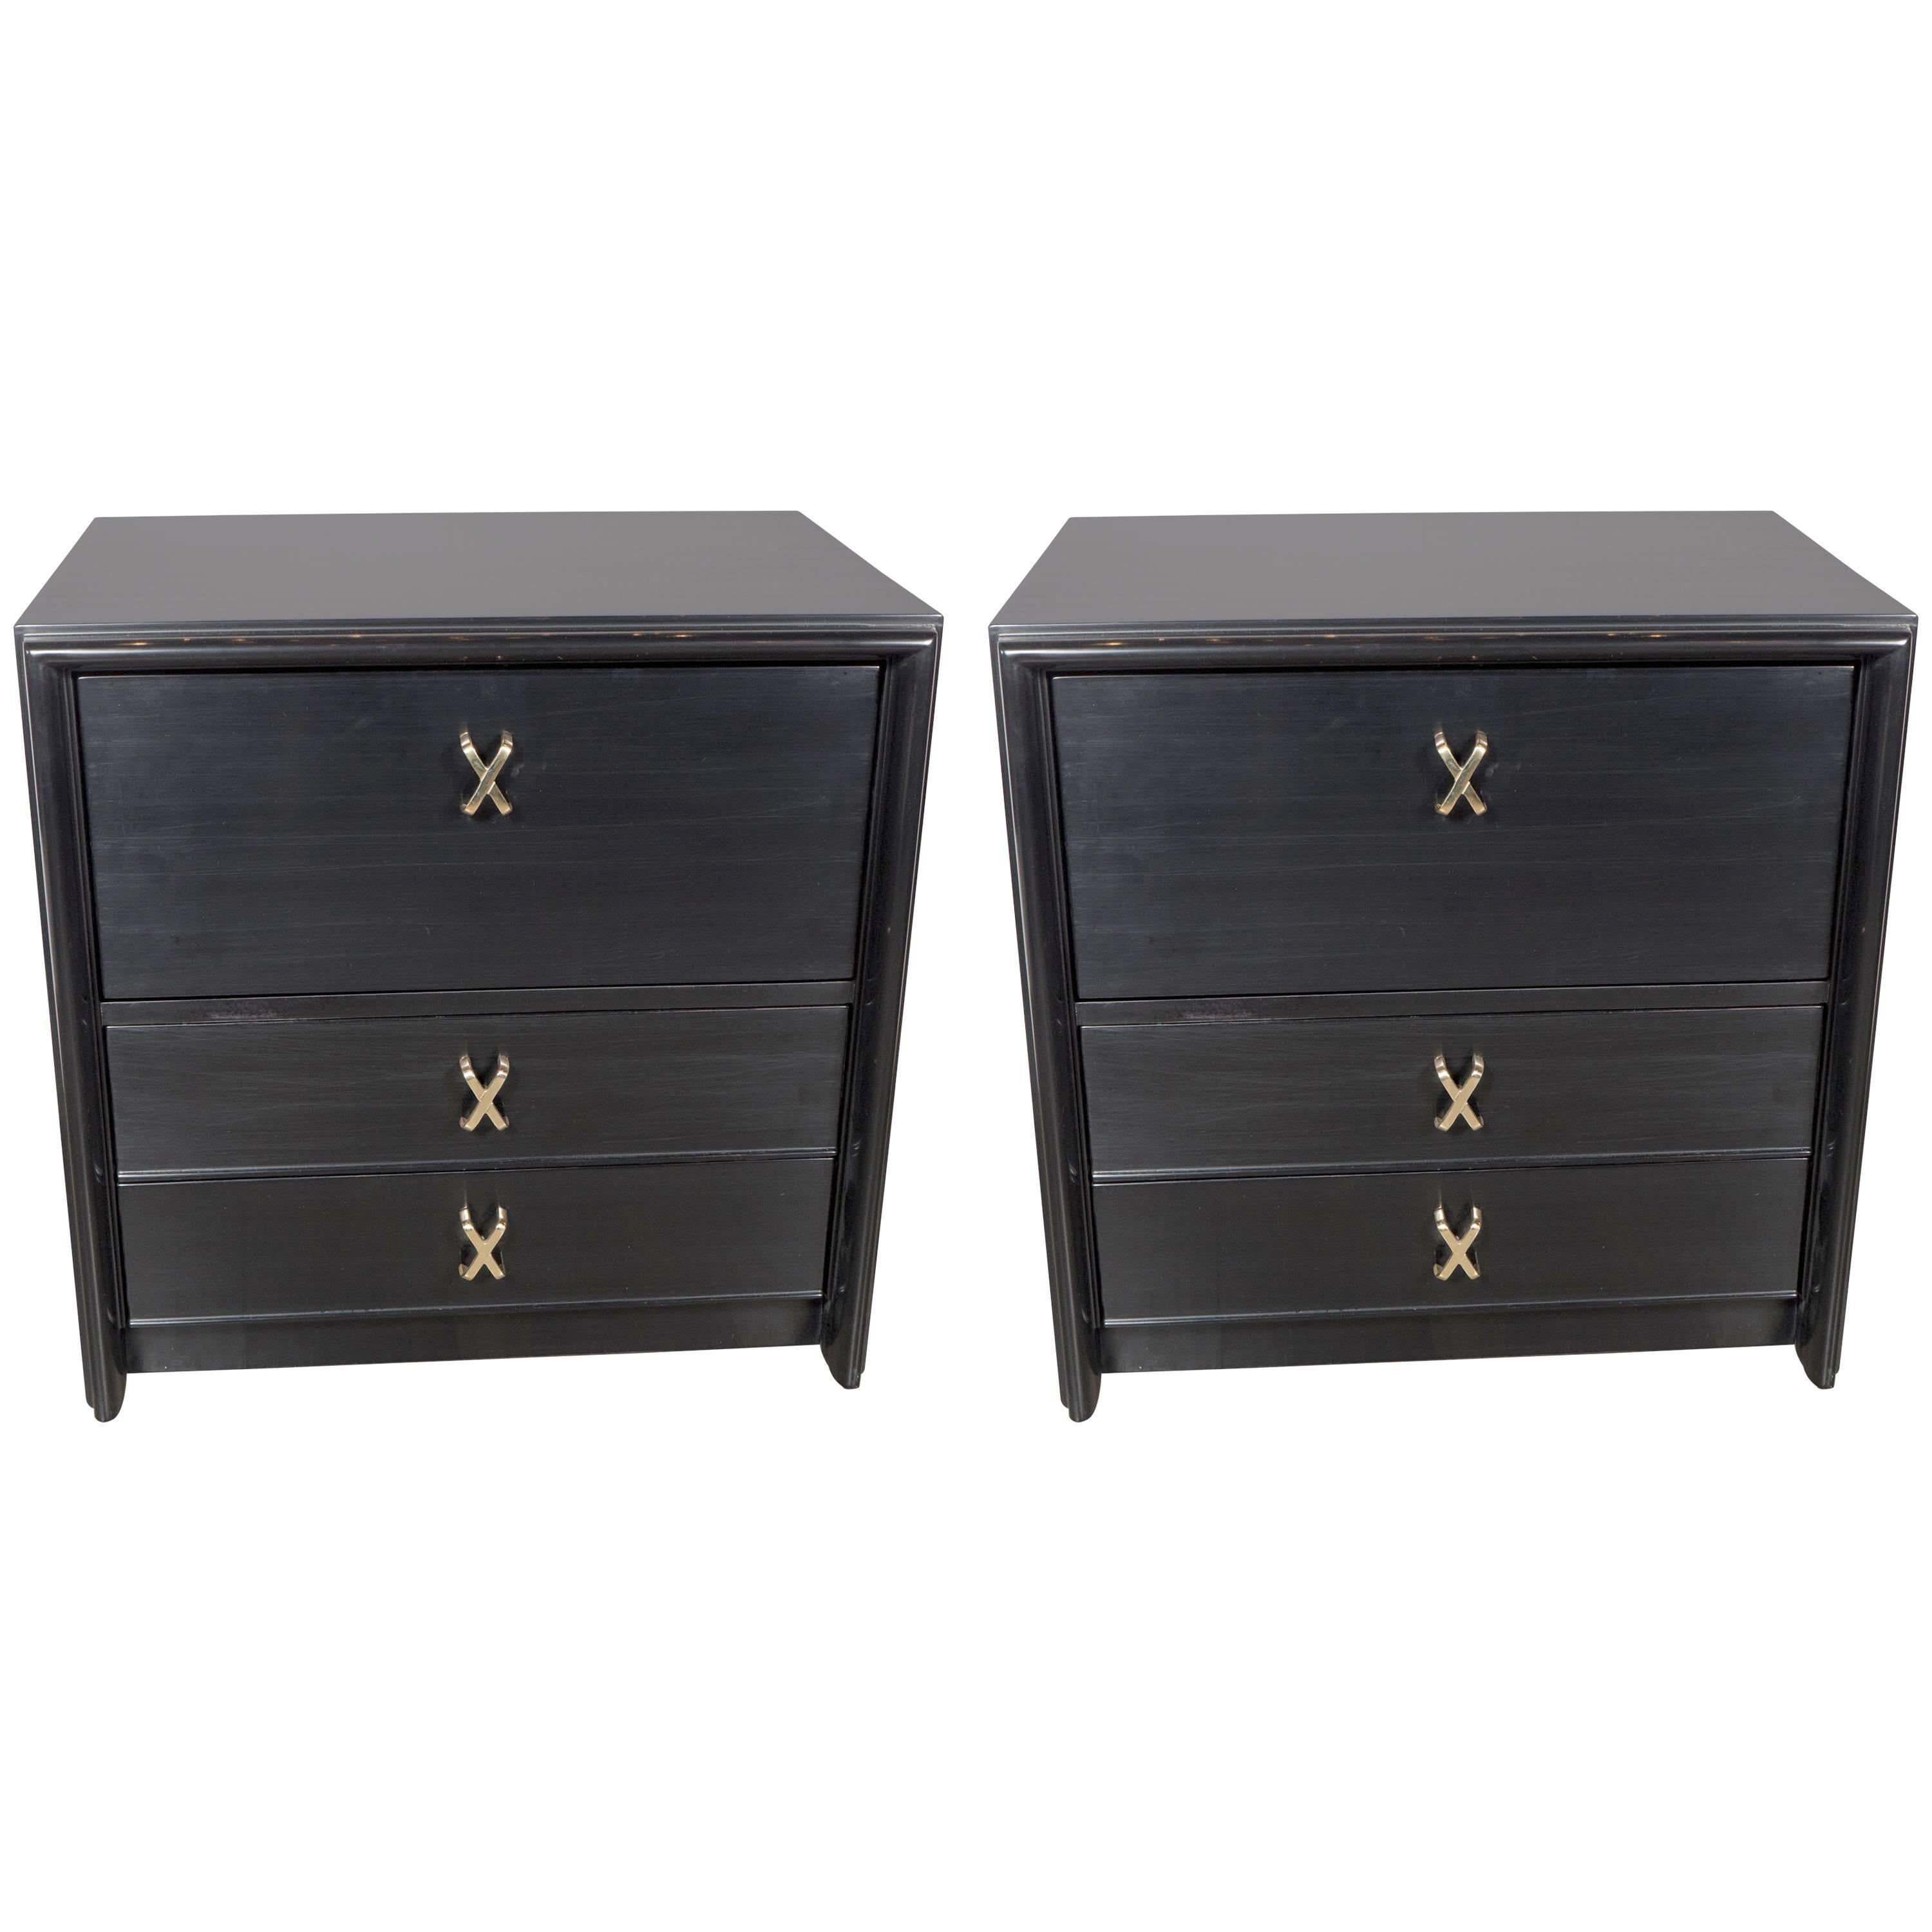 Pair of Nightstands in Ebonized Walnut with Brass "X" Fittings by Paul Frankl﻿